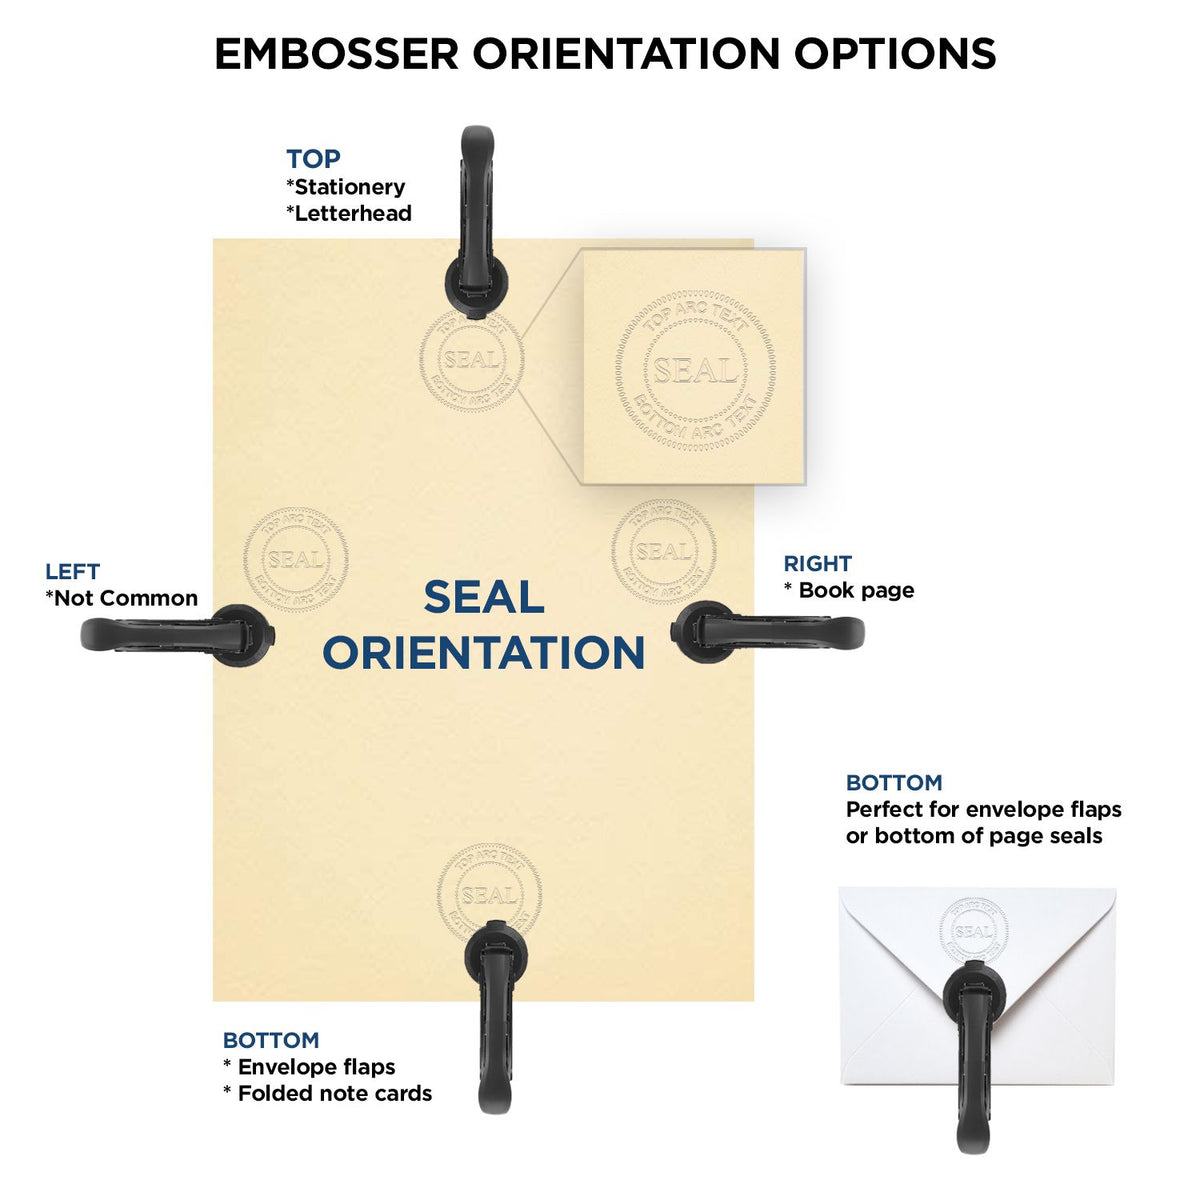 An infographic for the State of Tennessee Soft Land Surveyor Embossing Seal showing embosser orientation, this is showing examples of a top, bottom, right and left insert.